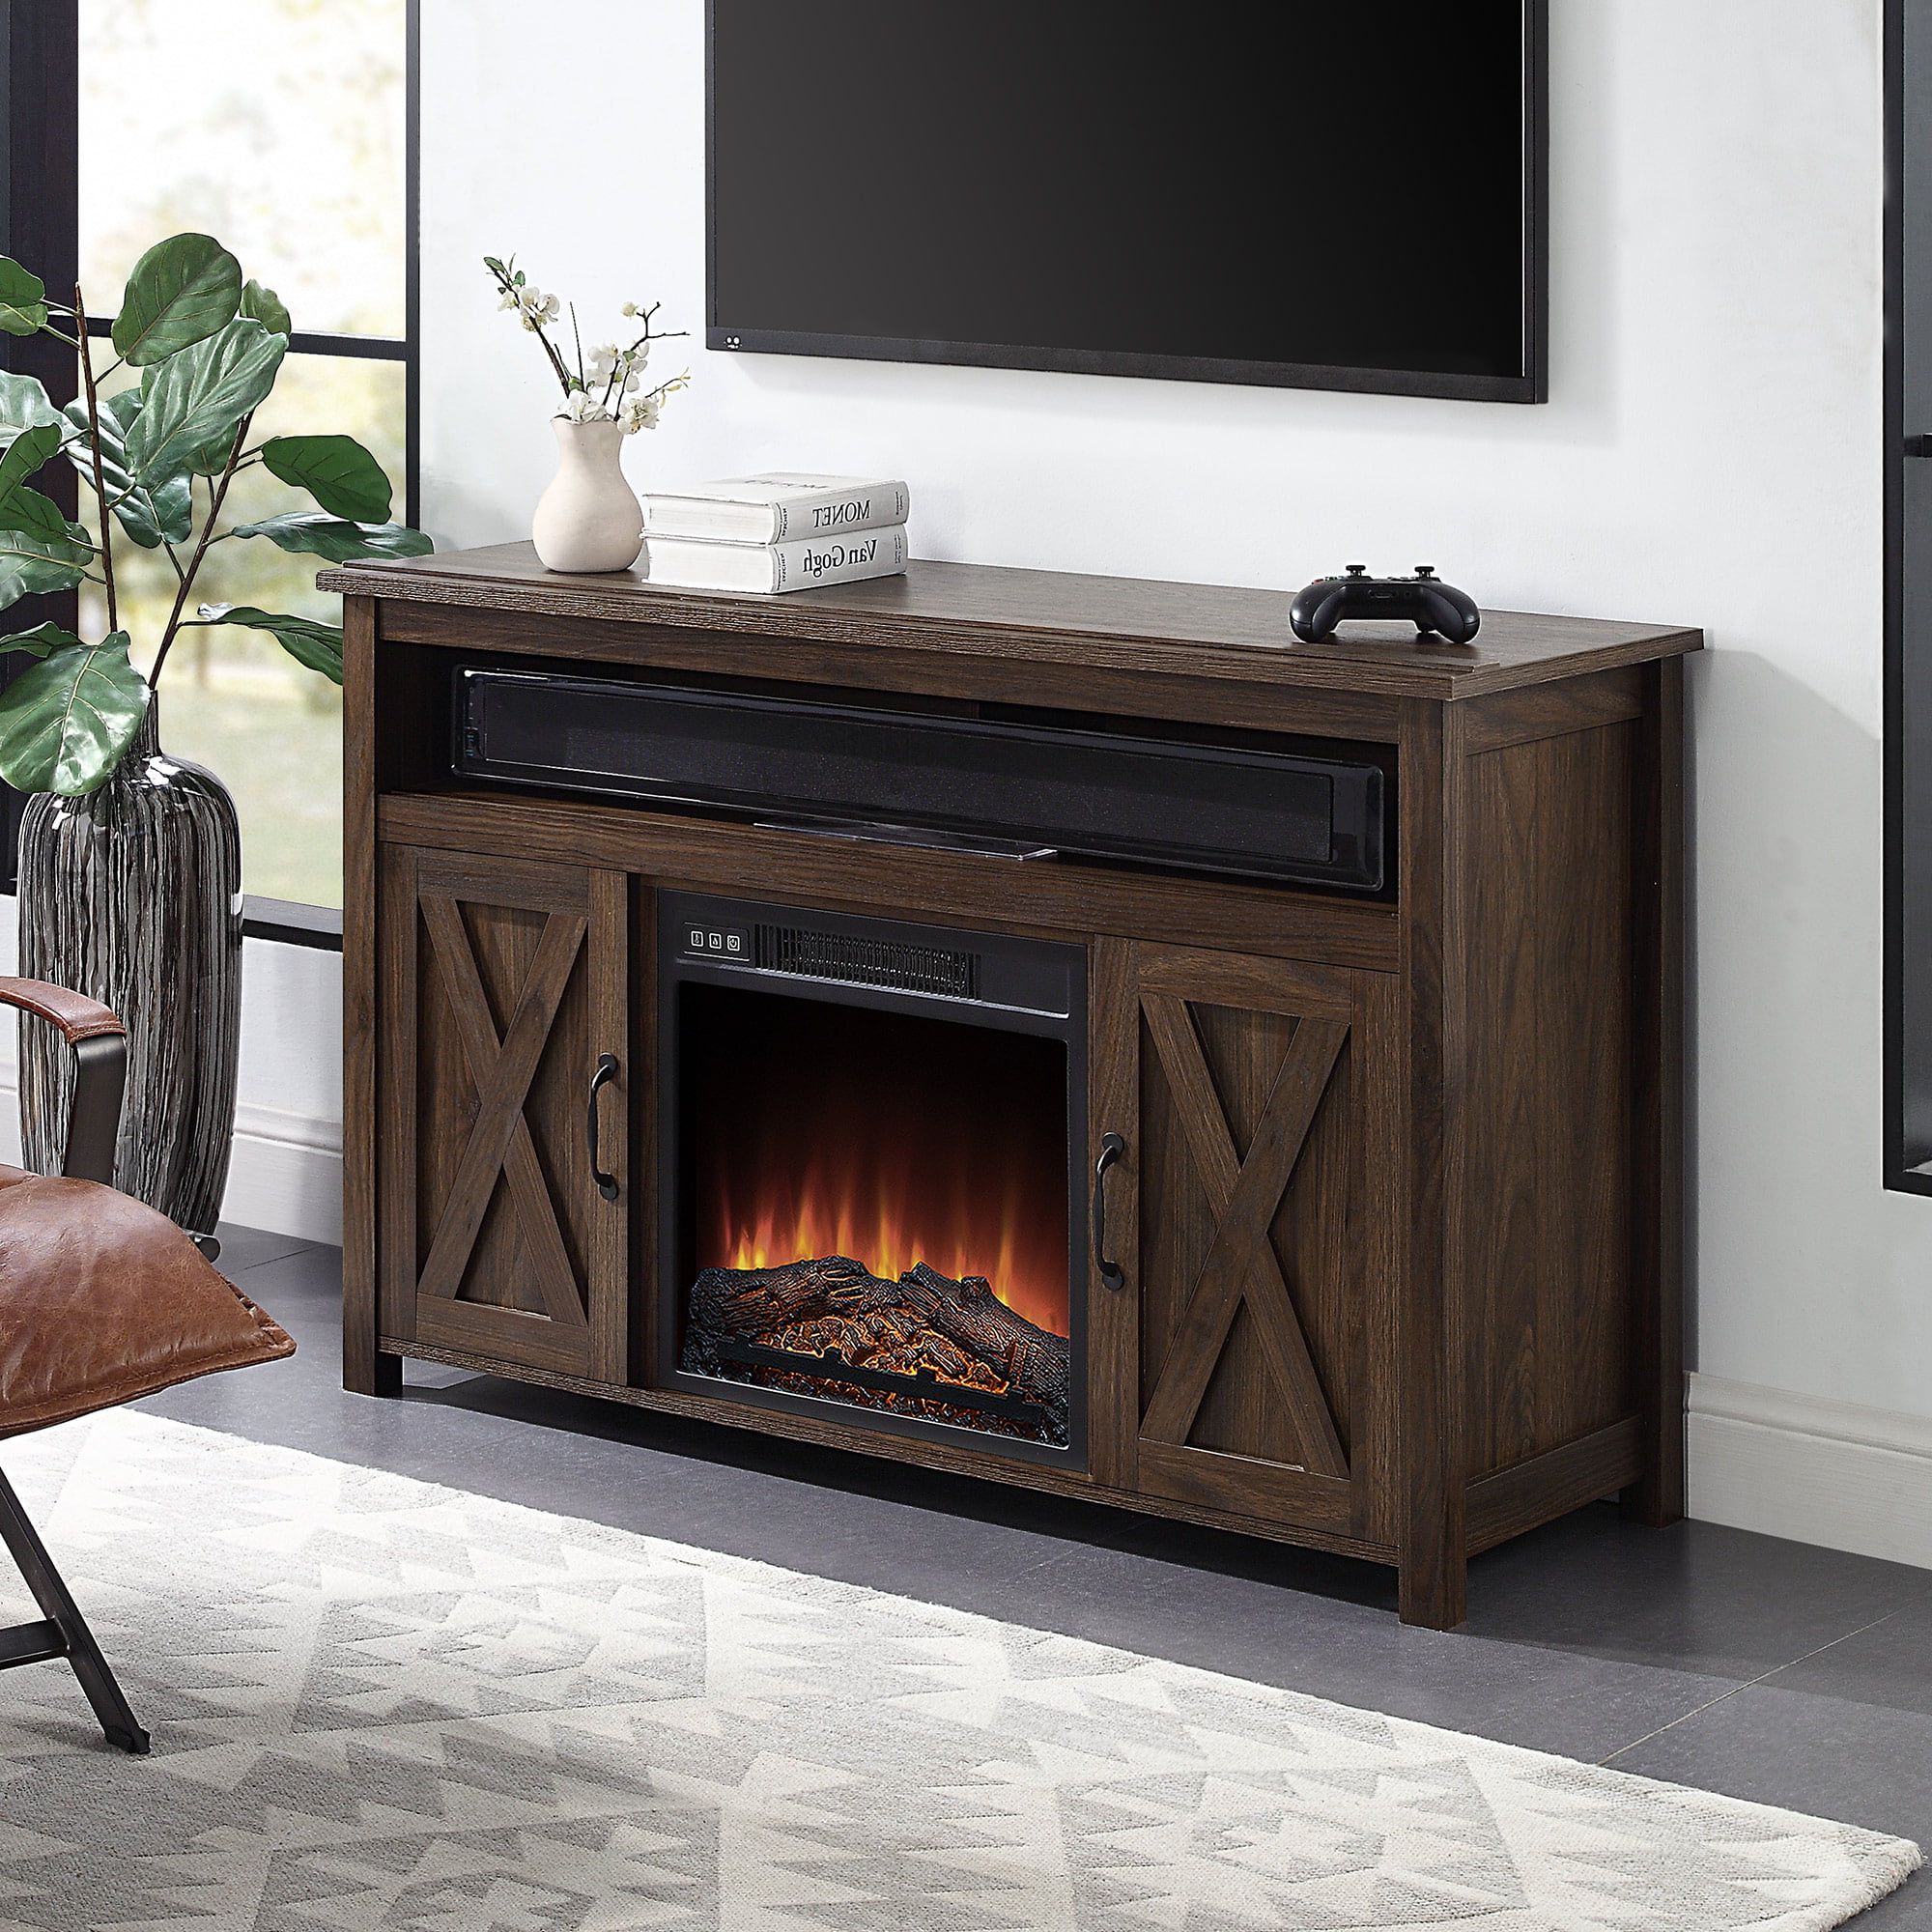 Electric Fireplace Tv Stands Throughout Recent Belleze Tv Stand Console Electric Fireplace With Remote Control, 48" Or (View 4 of 15)